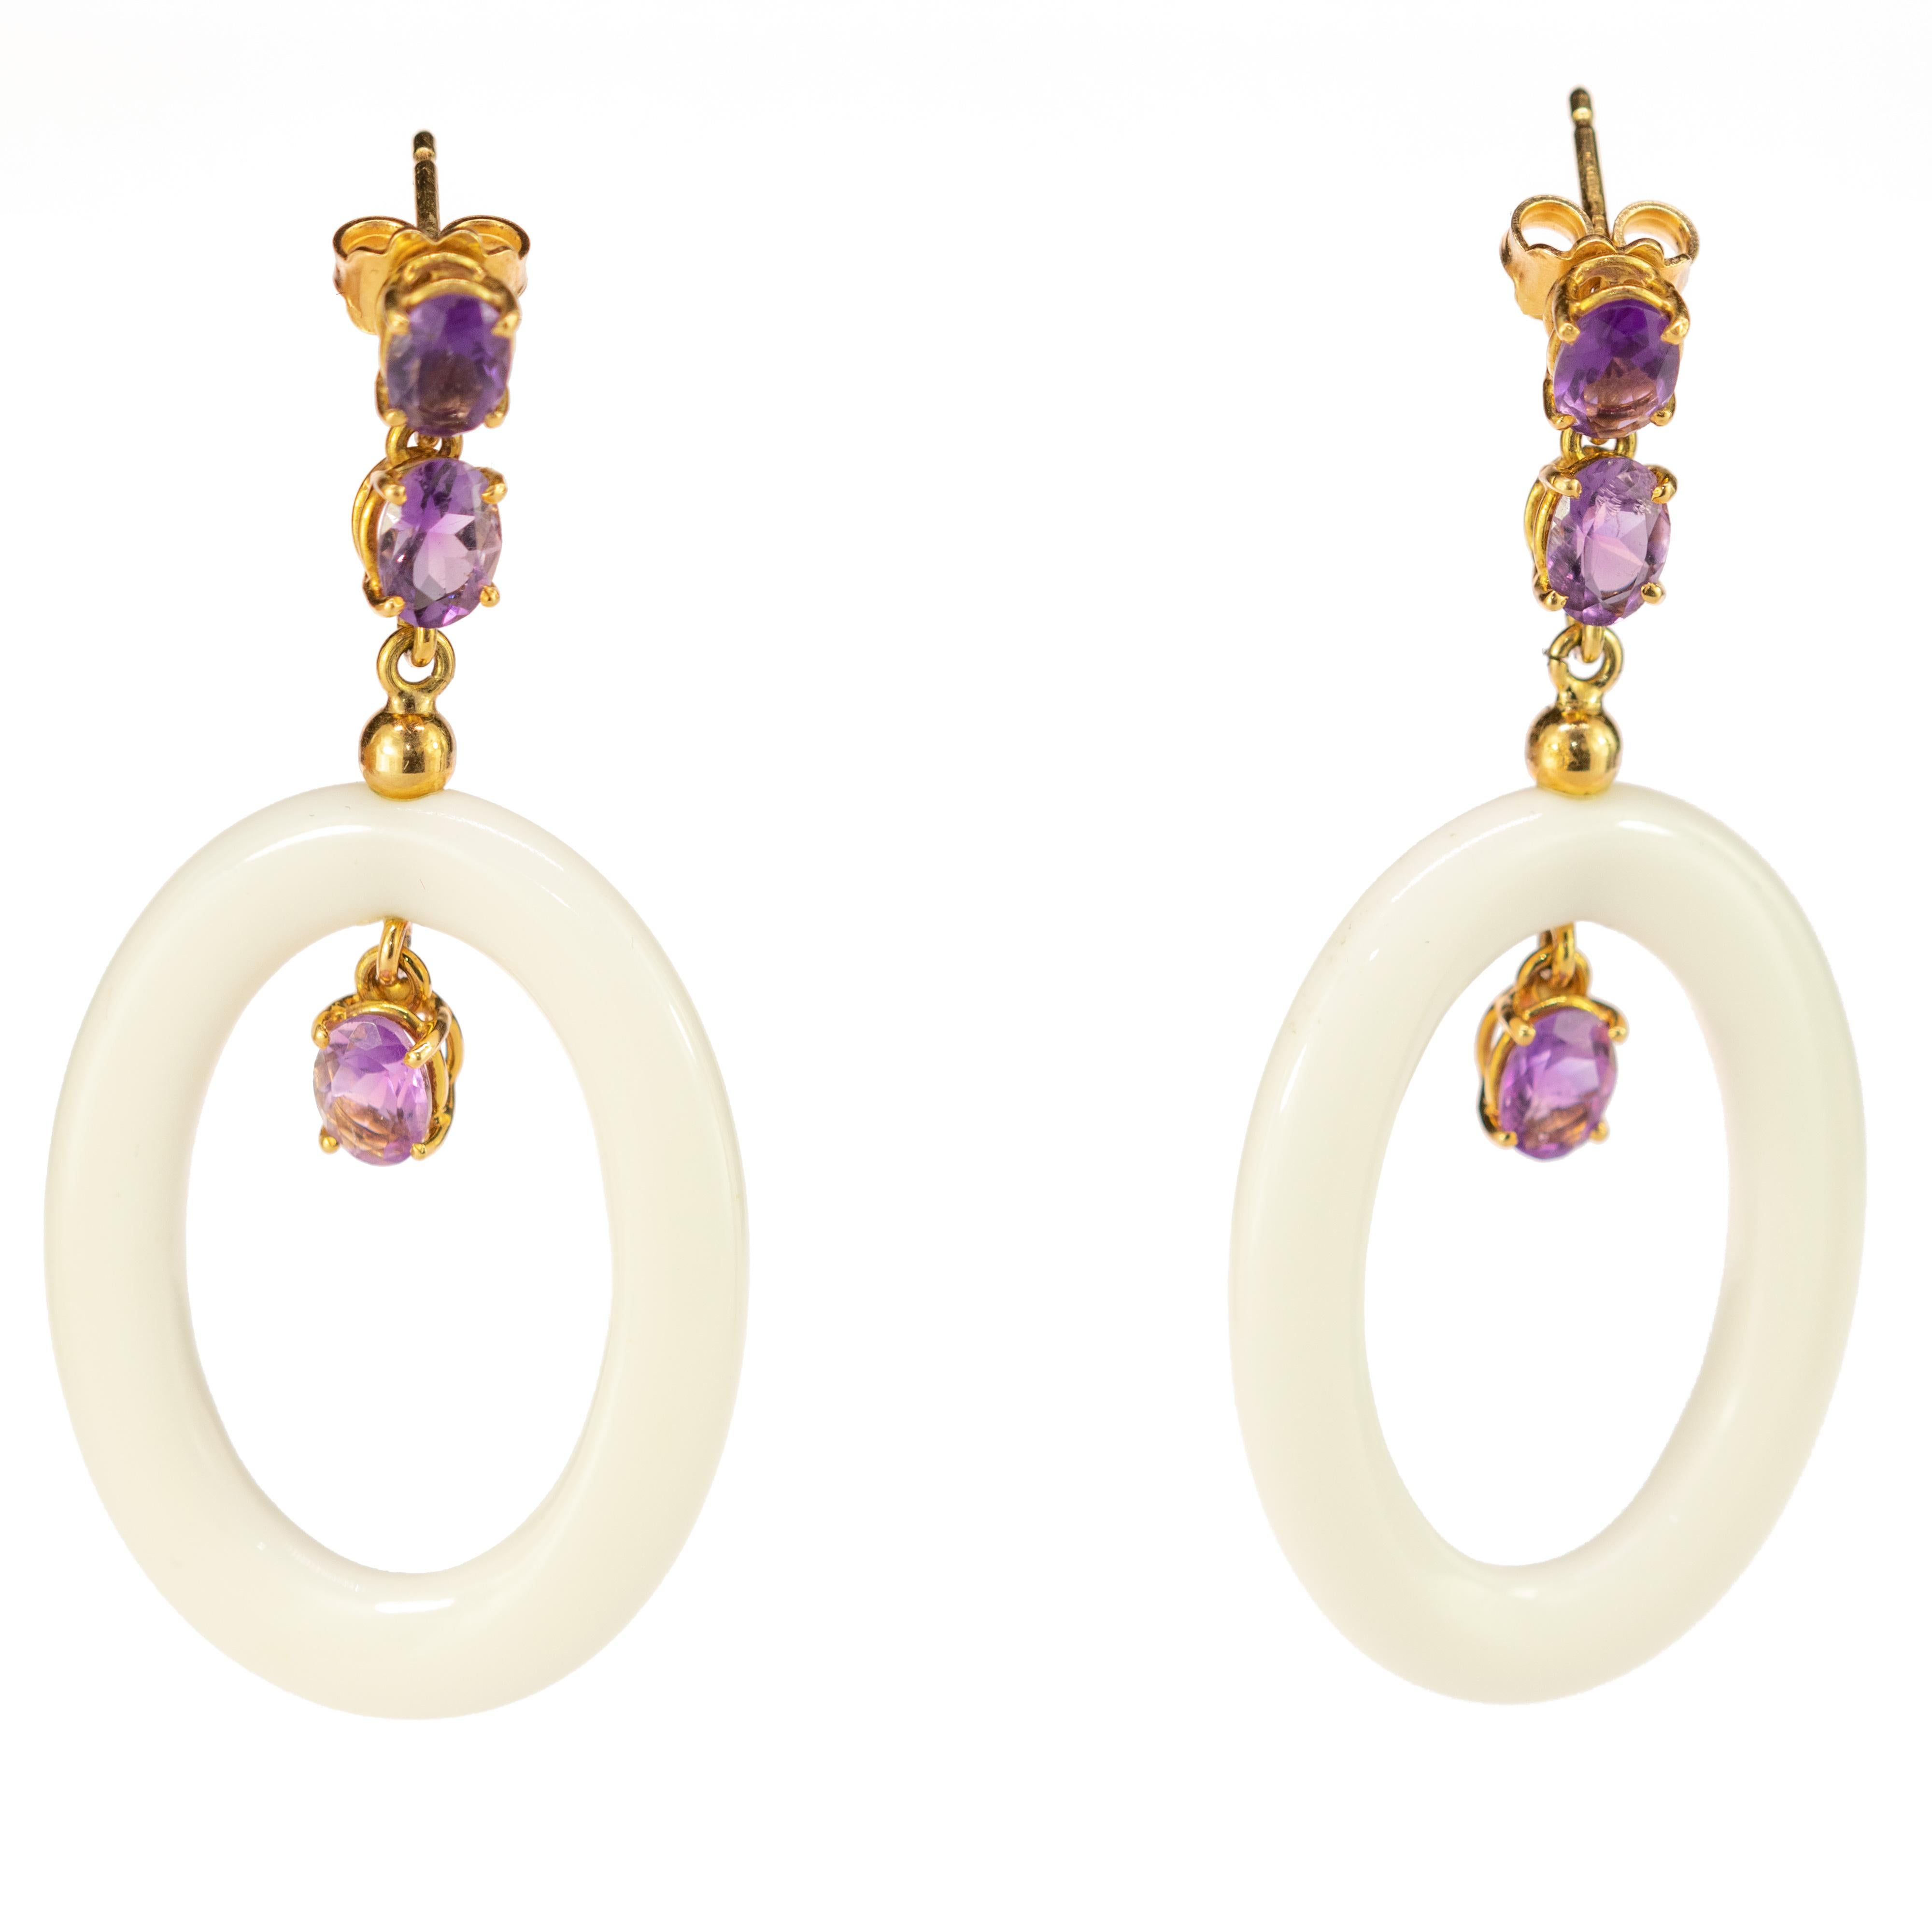 An enchanted oval white agate donut-shaped earrings holded by an 18k yellow gold delicate chain with two beautiful amethyst on top followed by a gold round gem and a third amethyst holding inside the agate. Modern designs full of details and soft